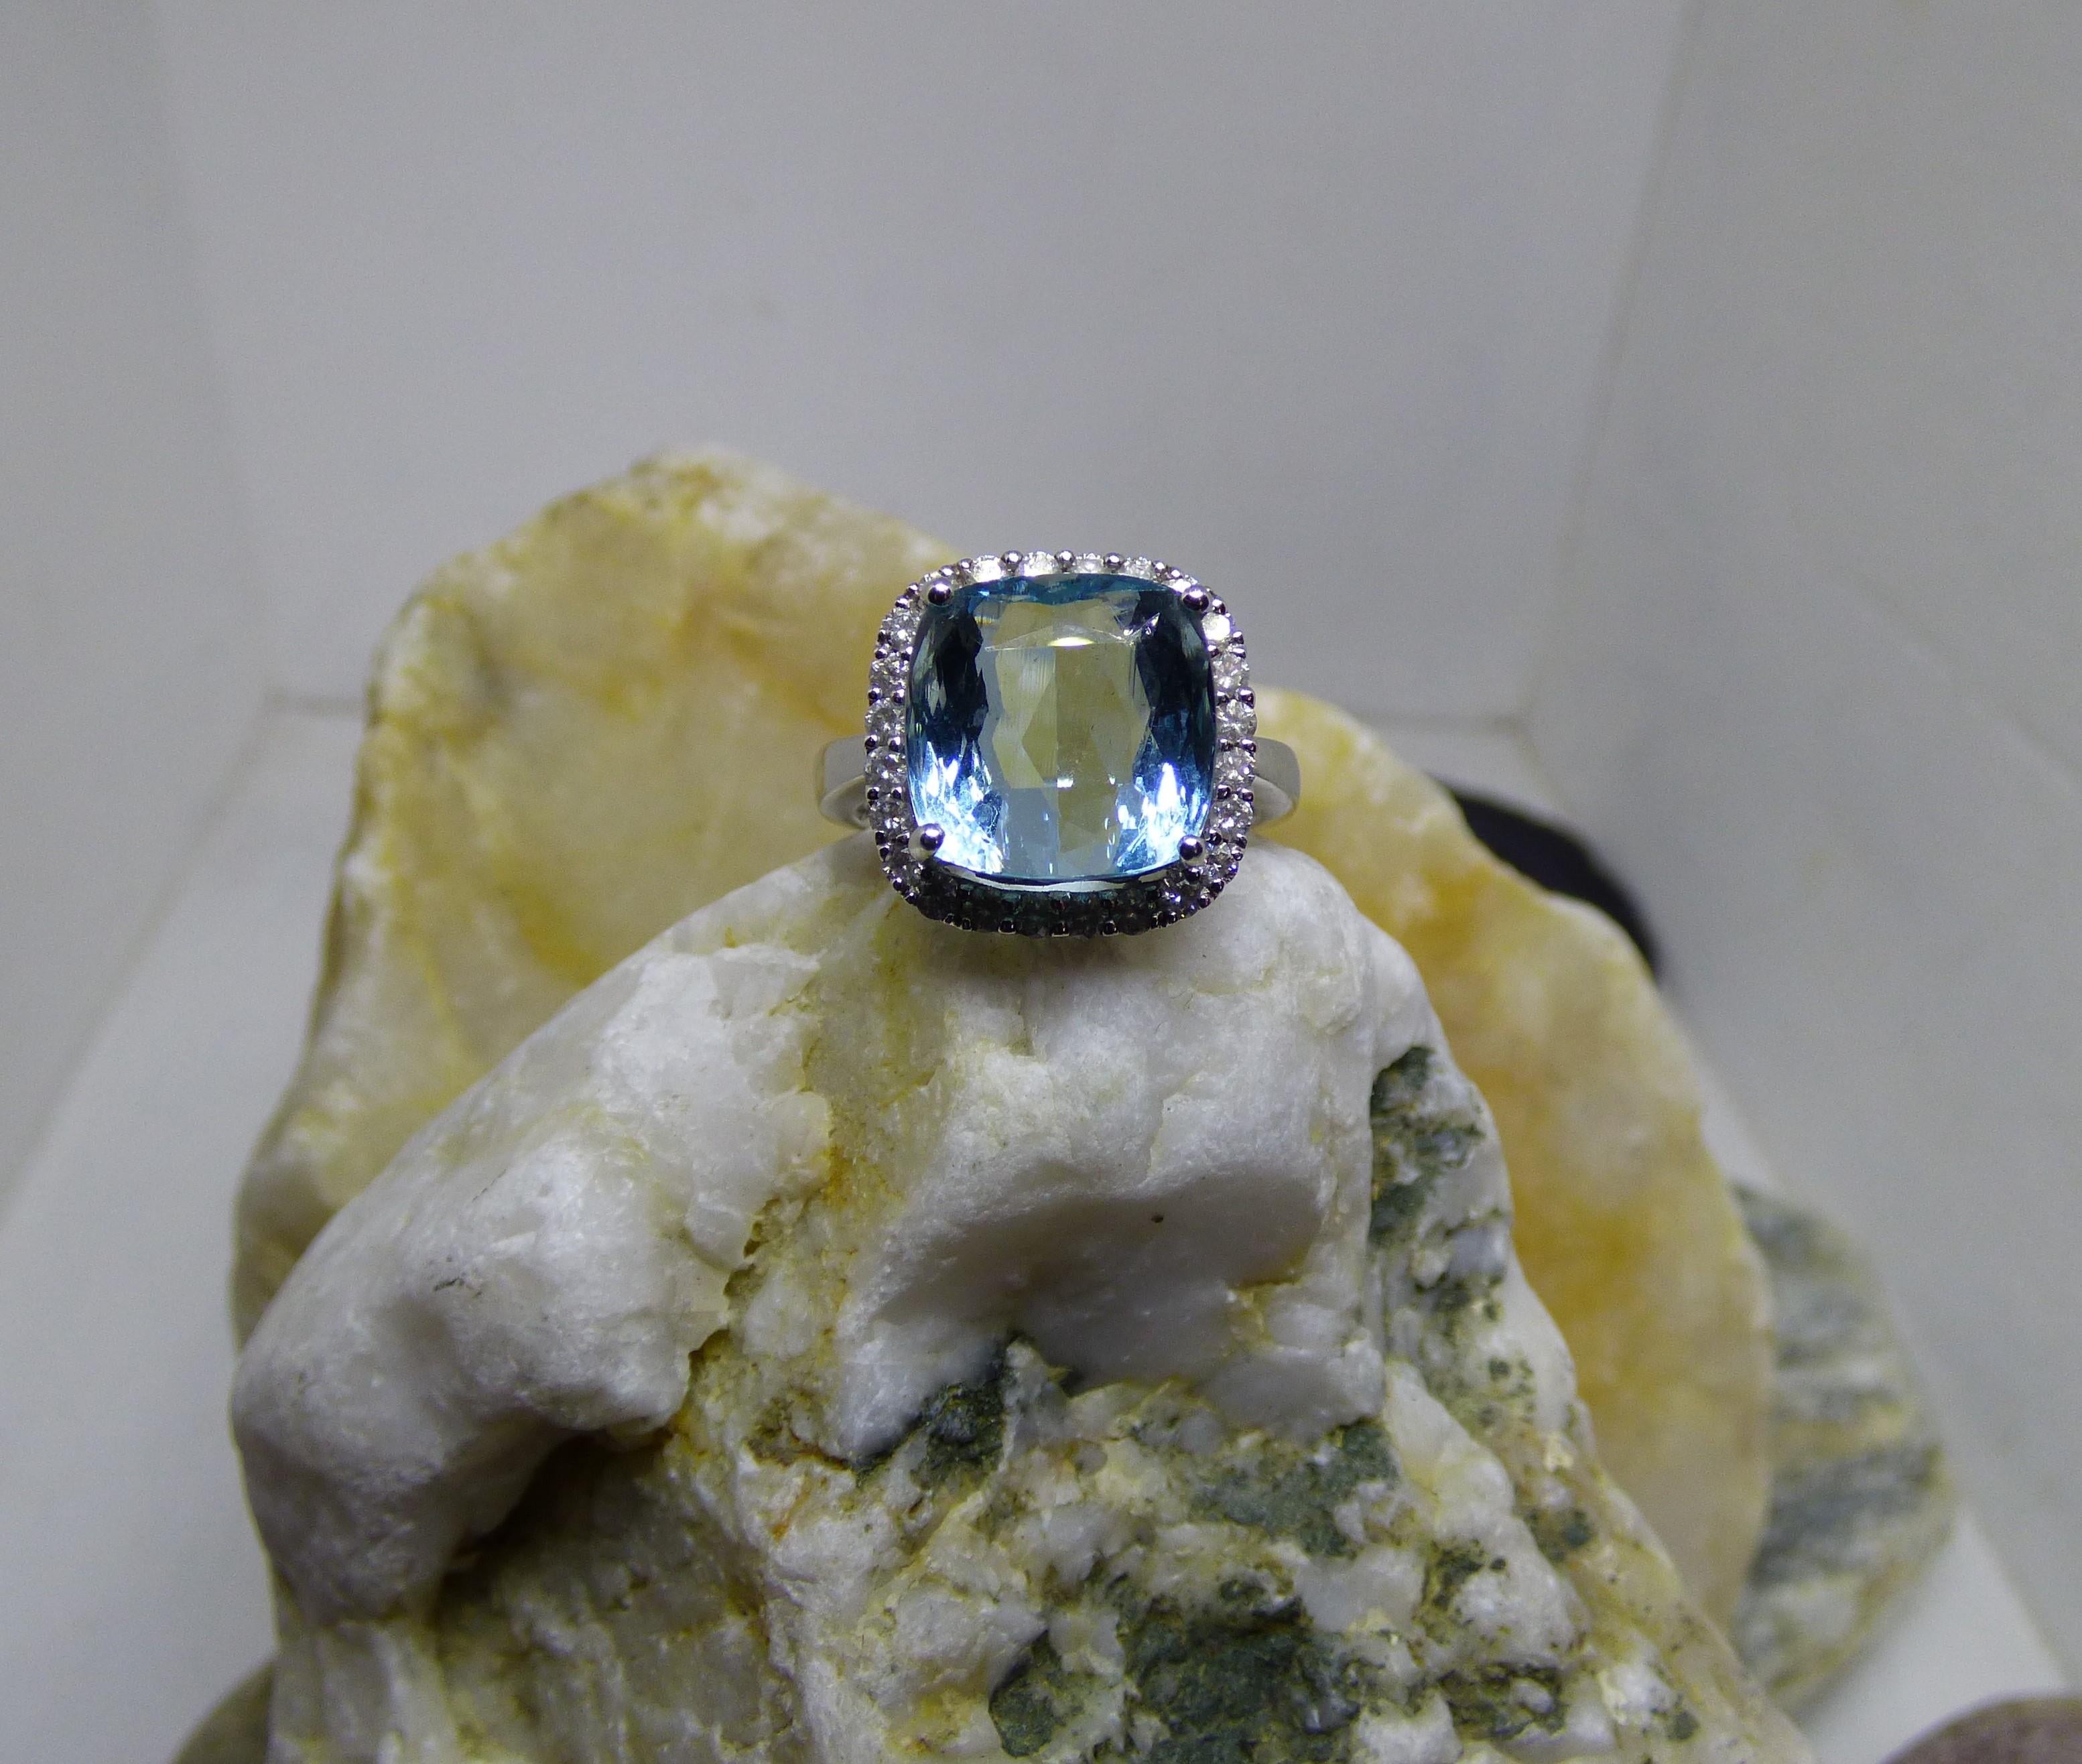 A bright Aquamarine cushion cut stone is surrounded by Diamonds in this ring. The Aquamarine is 12X12mm and 7.32ct. It is surrounded by 24 Diamonds with a total Diamond weight of .55ct.  The ring is handmade in 18K white gold and hallmarked by the